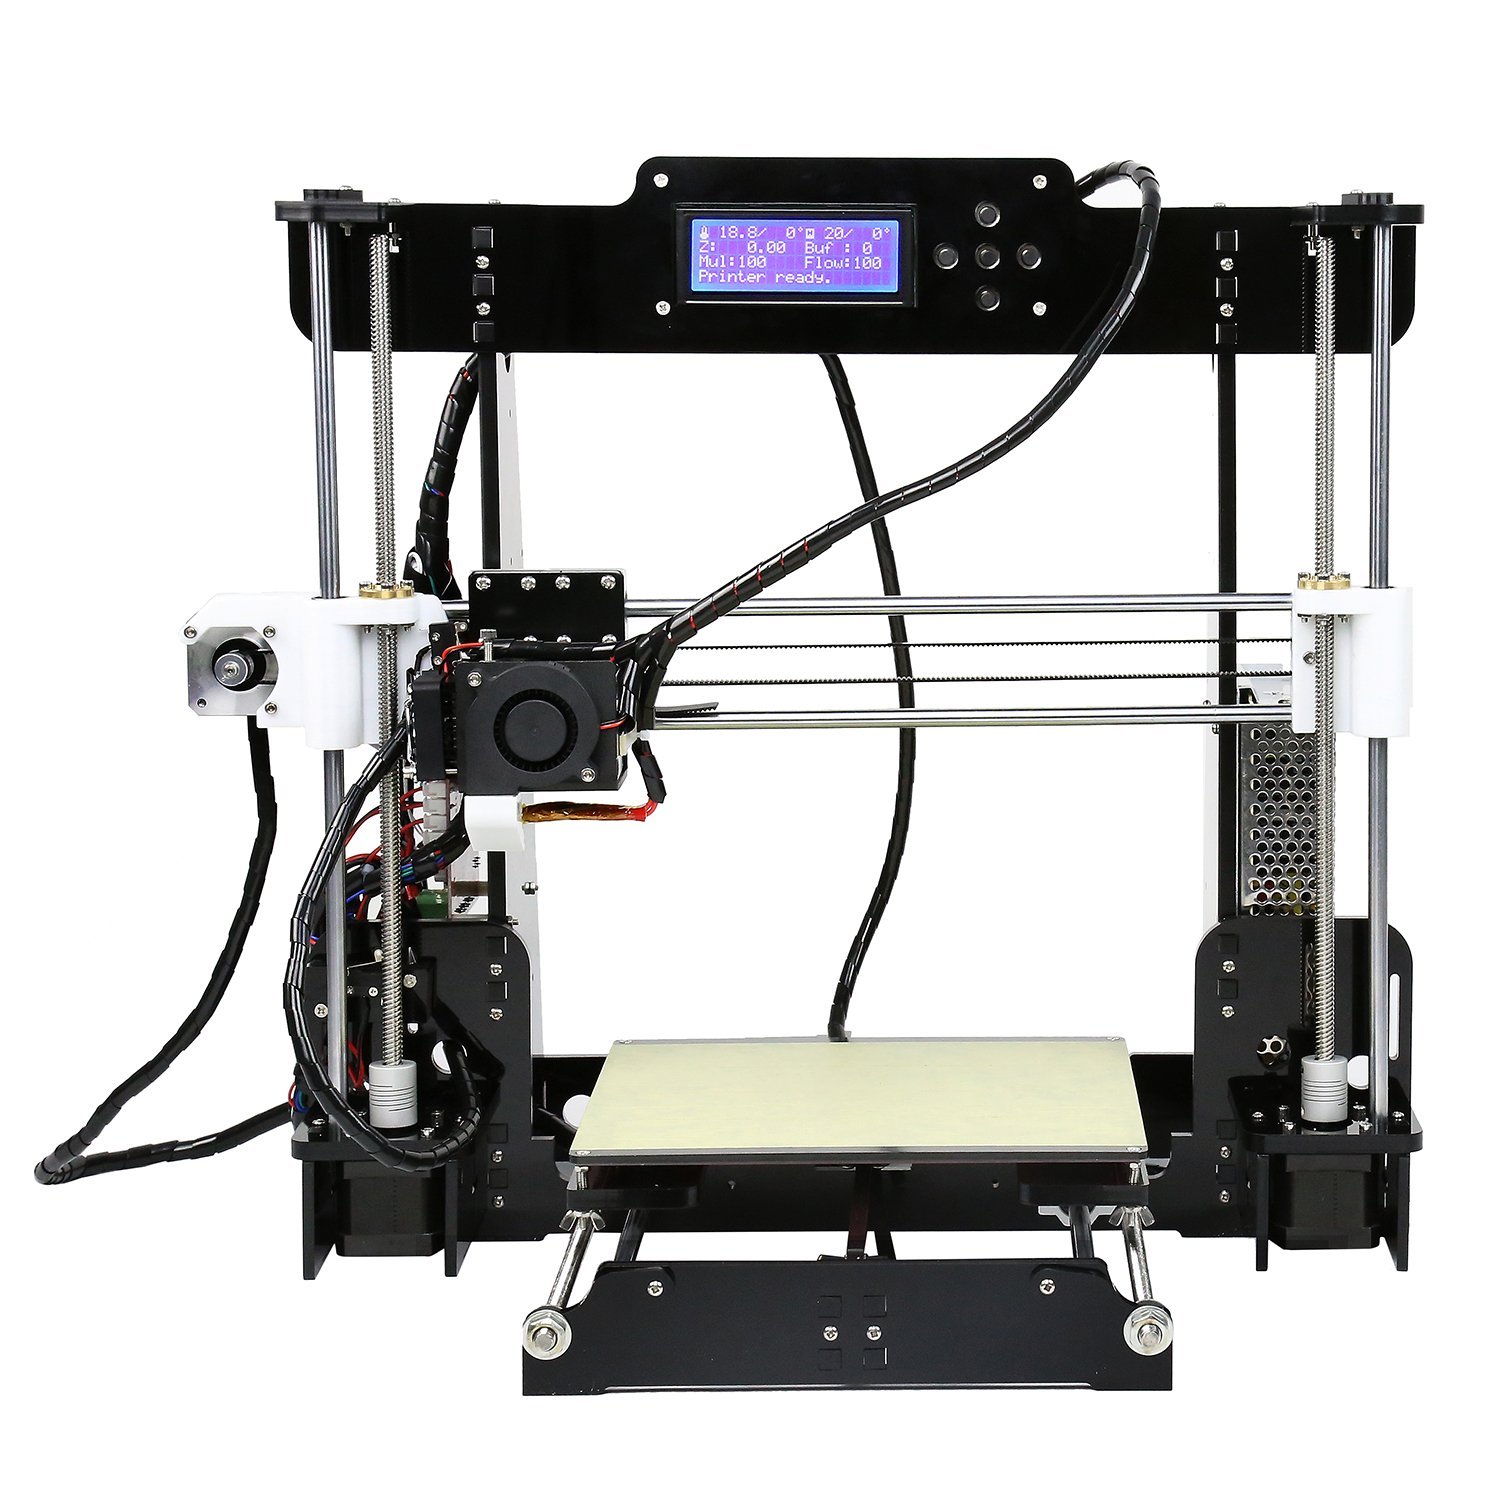 Top 25 Affordable 3D Printer Under $1000 in 2018